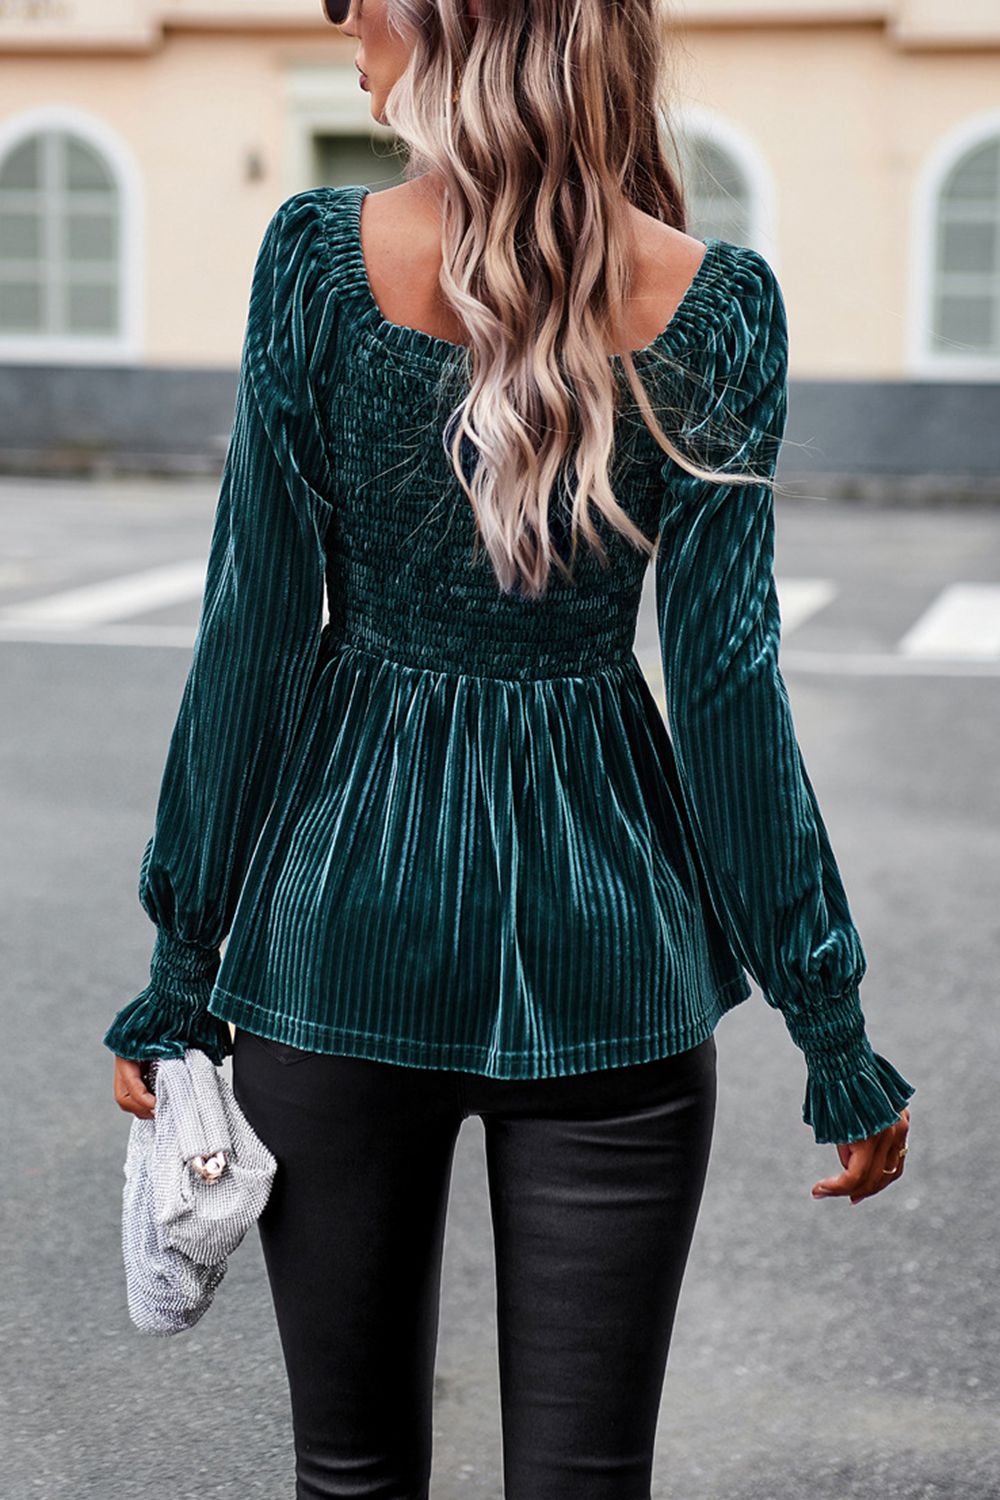 Smocked Square Neck Long Sleeve Blouse - Women’s Clothing & Accessories - Shirts & Tops - 18 - 2024